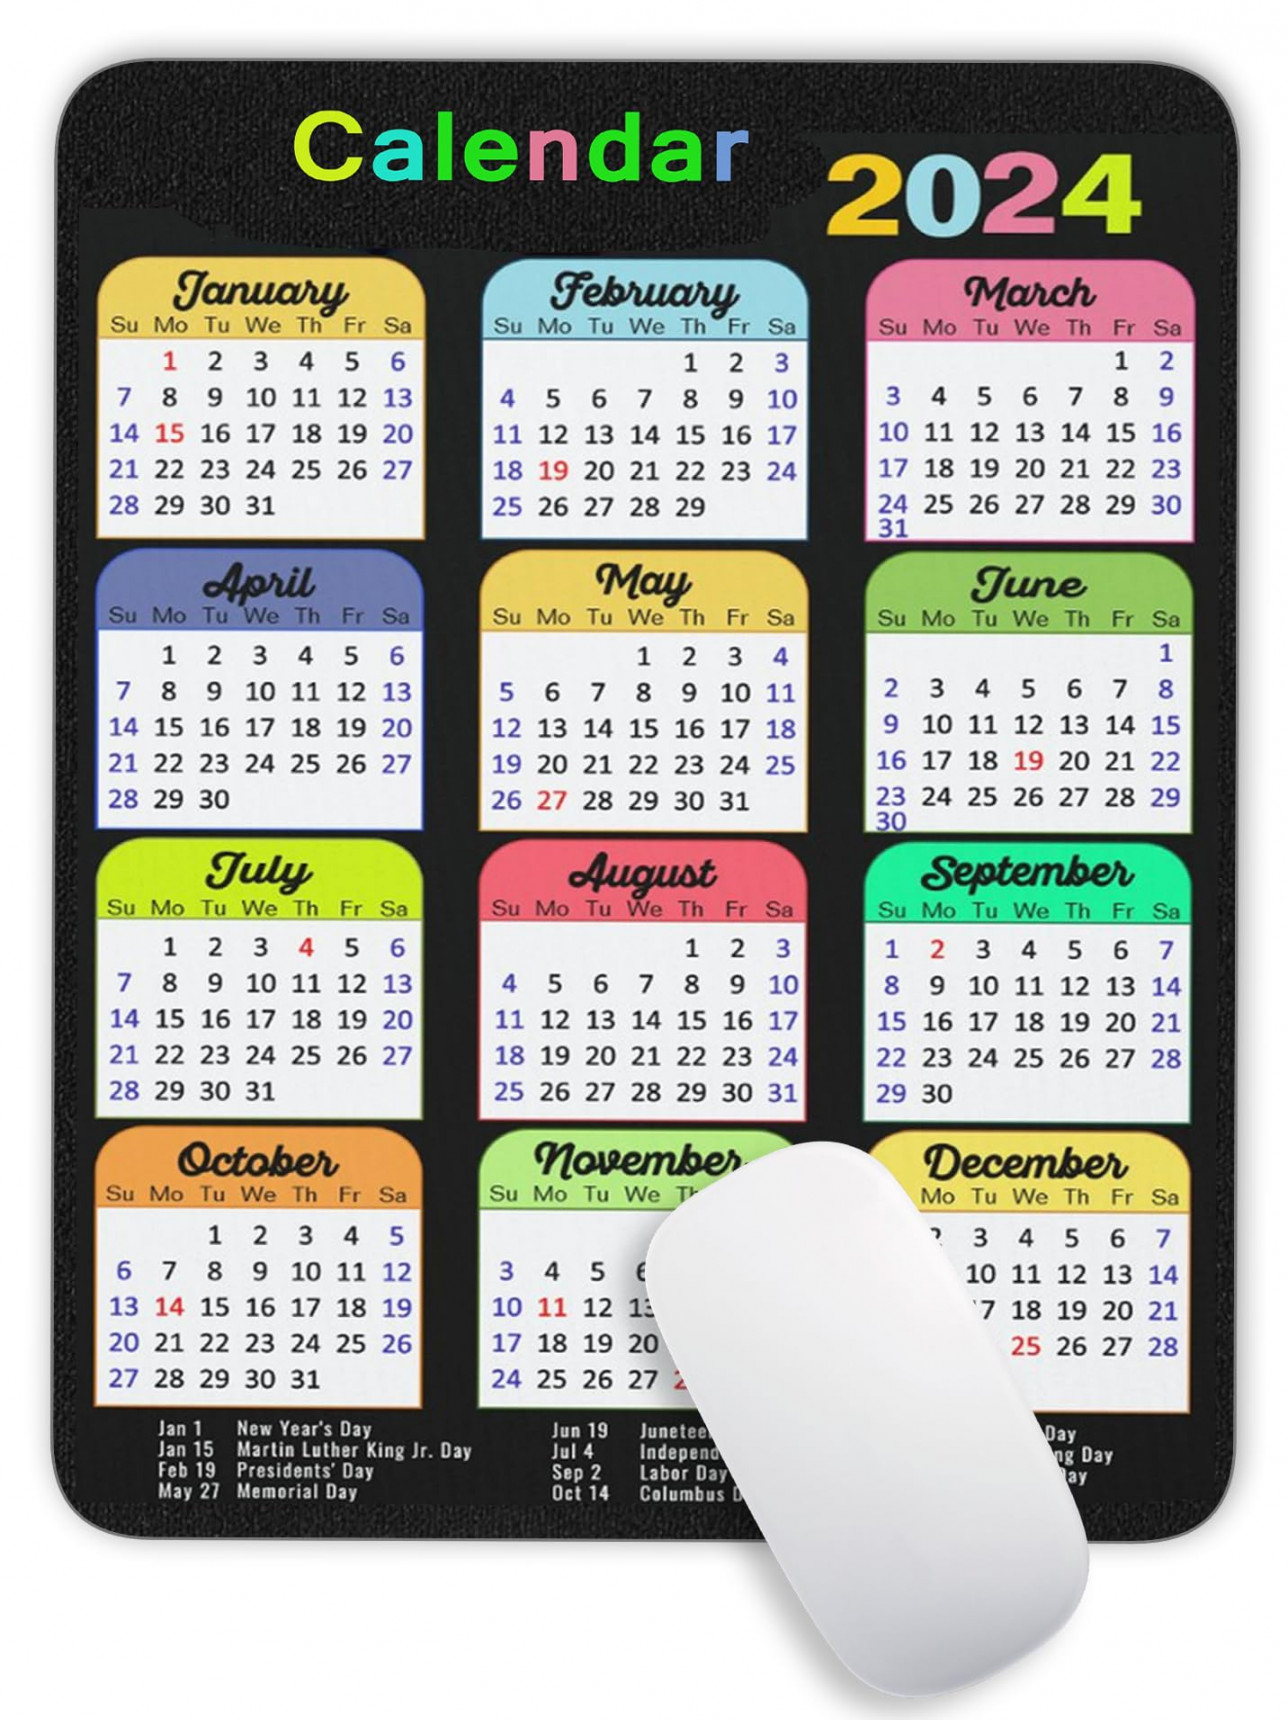 Color Calendar Vertical Mouse Pad, Gaming Calendar Mouse Mat with  Custom Design, Square Waterproof Mouse Pad Non-Slip Rubber Base MousePads  for